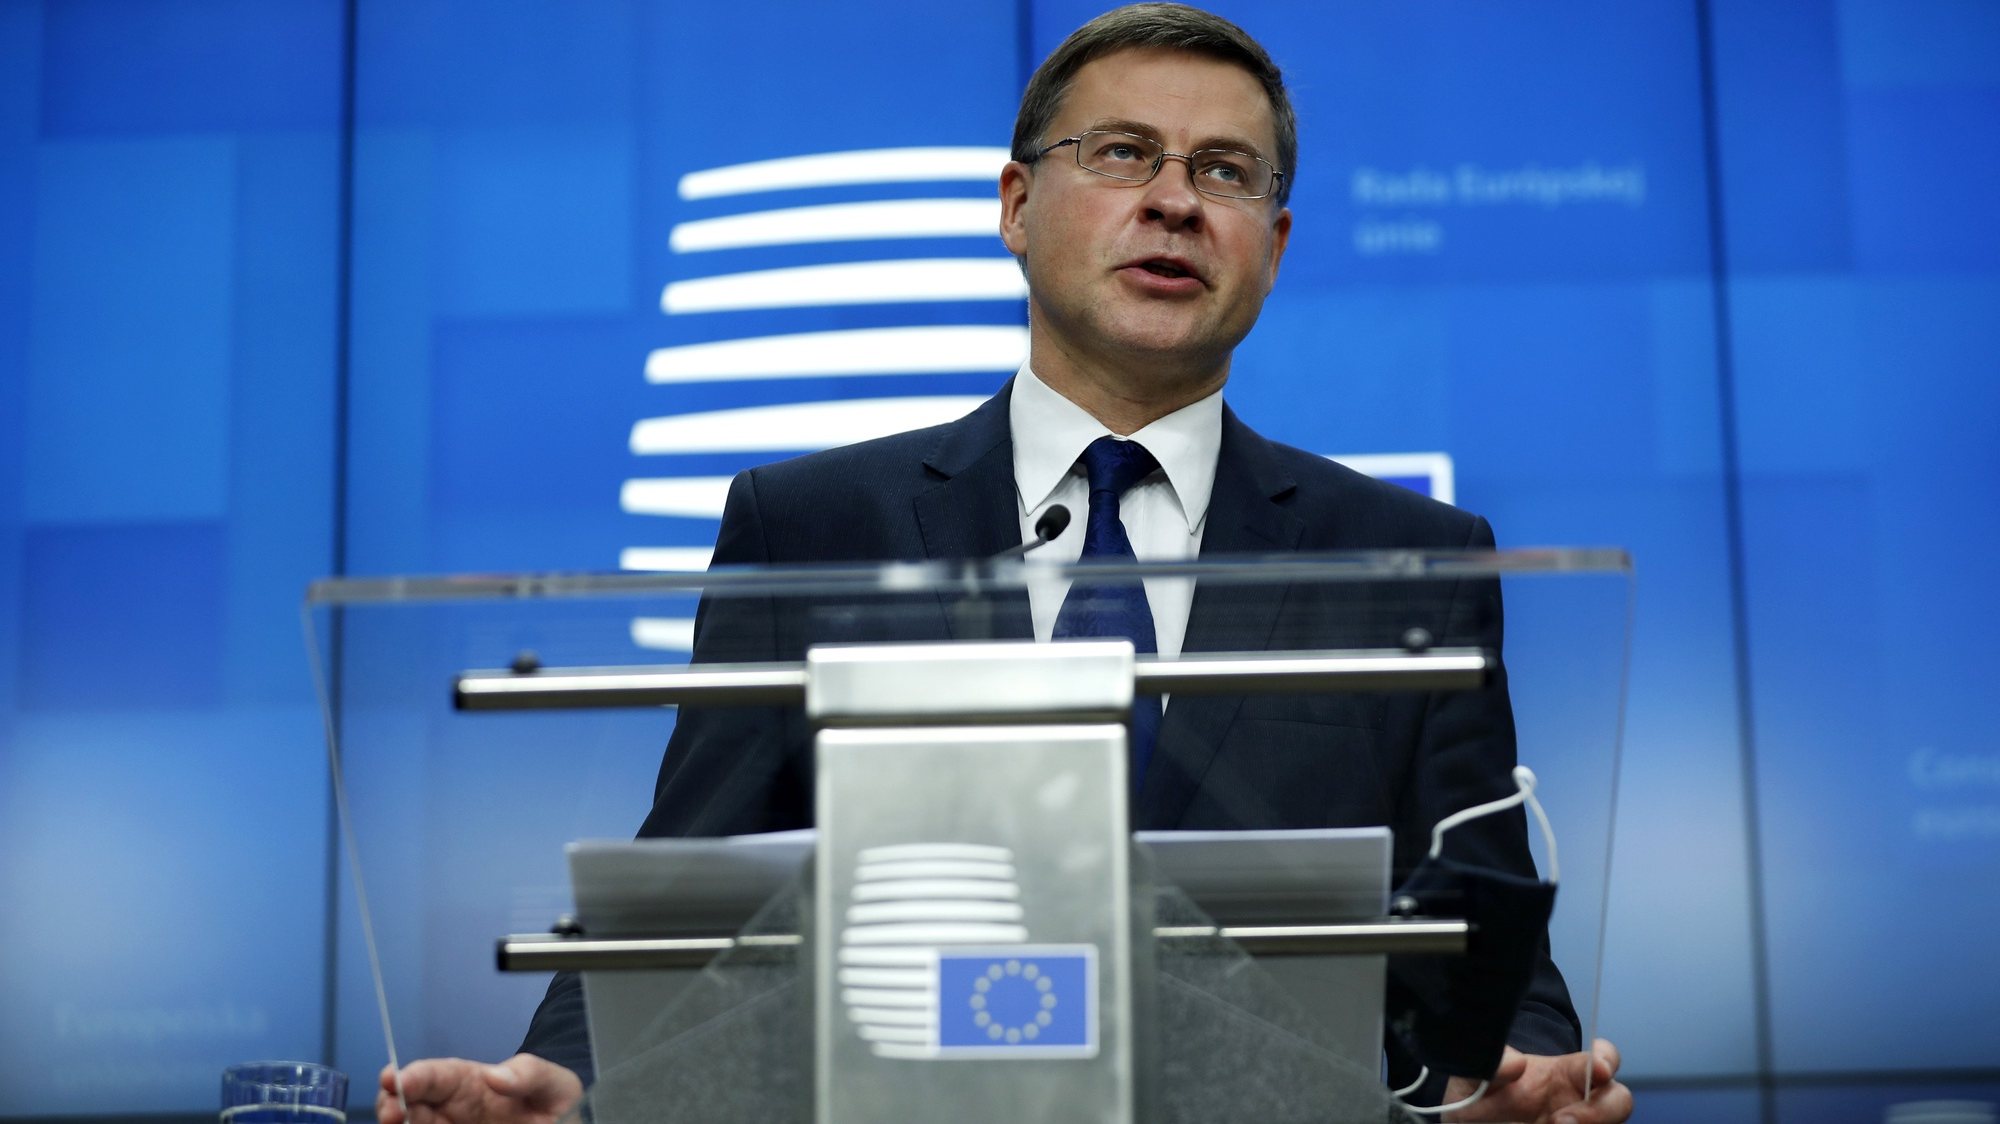 epa08809644 European Commission Vice-President Valdis Dombrovskis addresses a media conference after a meeting of EU trade ministers, in videoconference format, at the European Council building in Brussels, Belgium, 09 November 2020. European Union trade ministers exchanged views on the trade policy review and relations with China and the United States.  EPA/FRANCISCO SECO / POOL